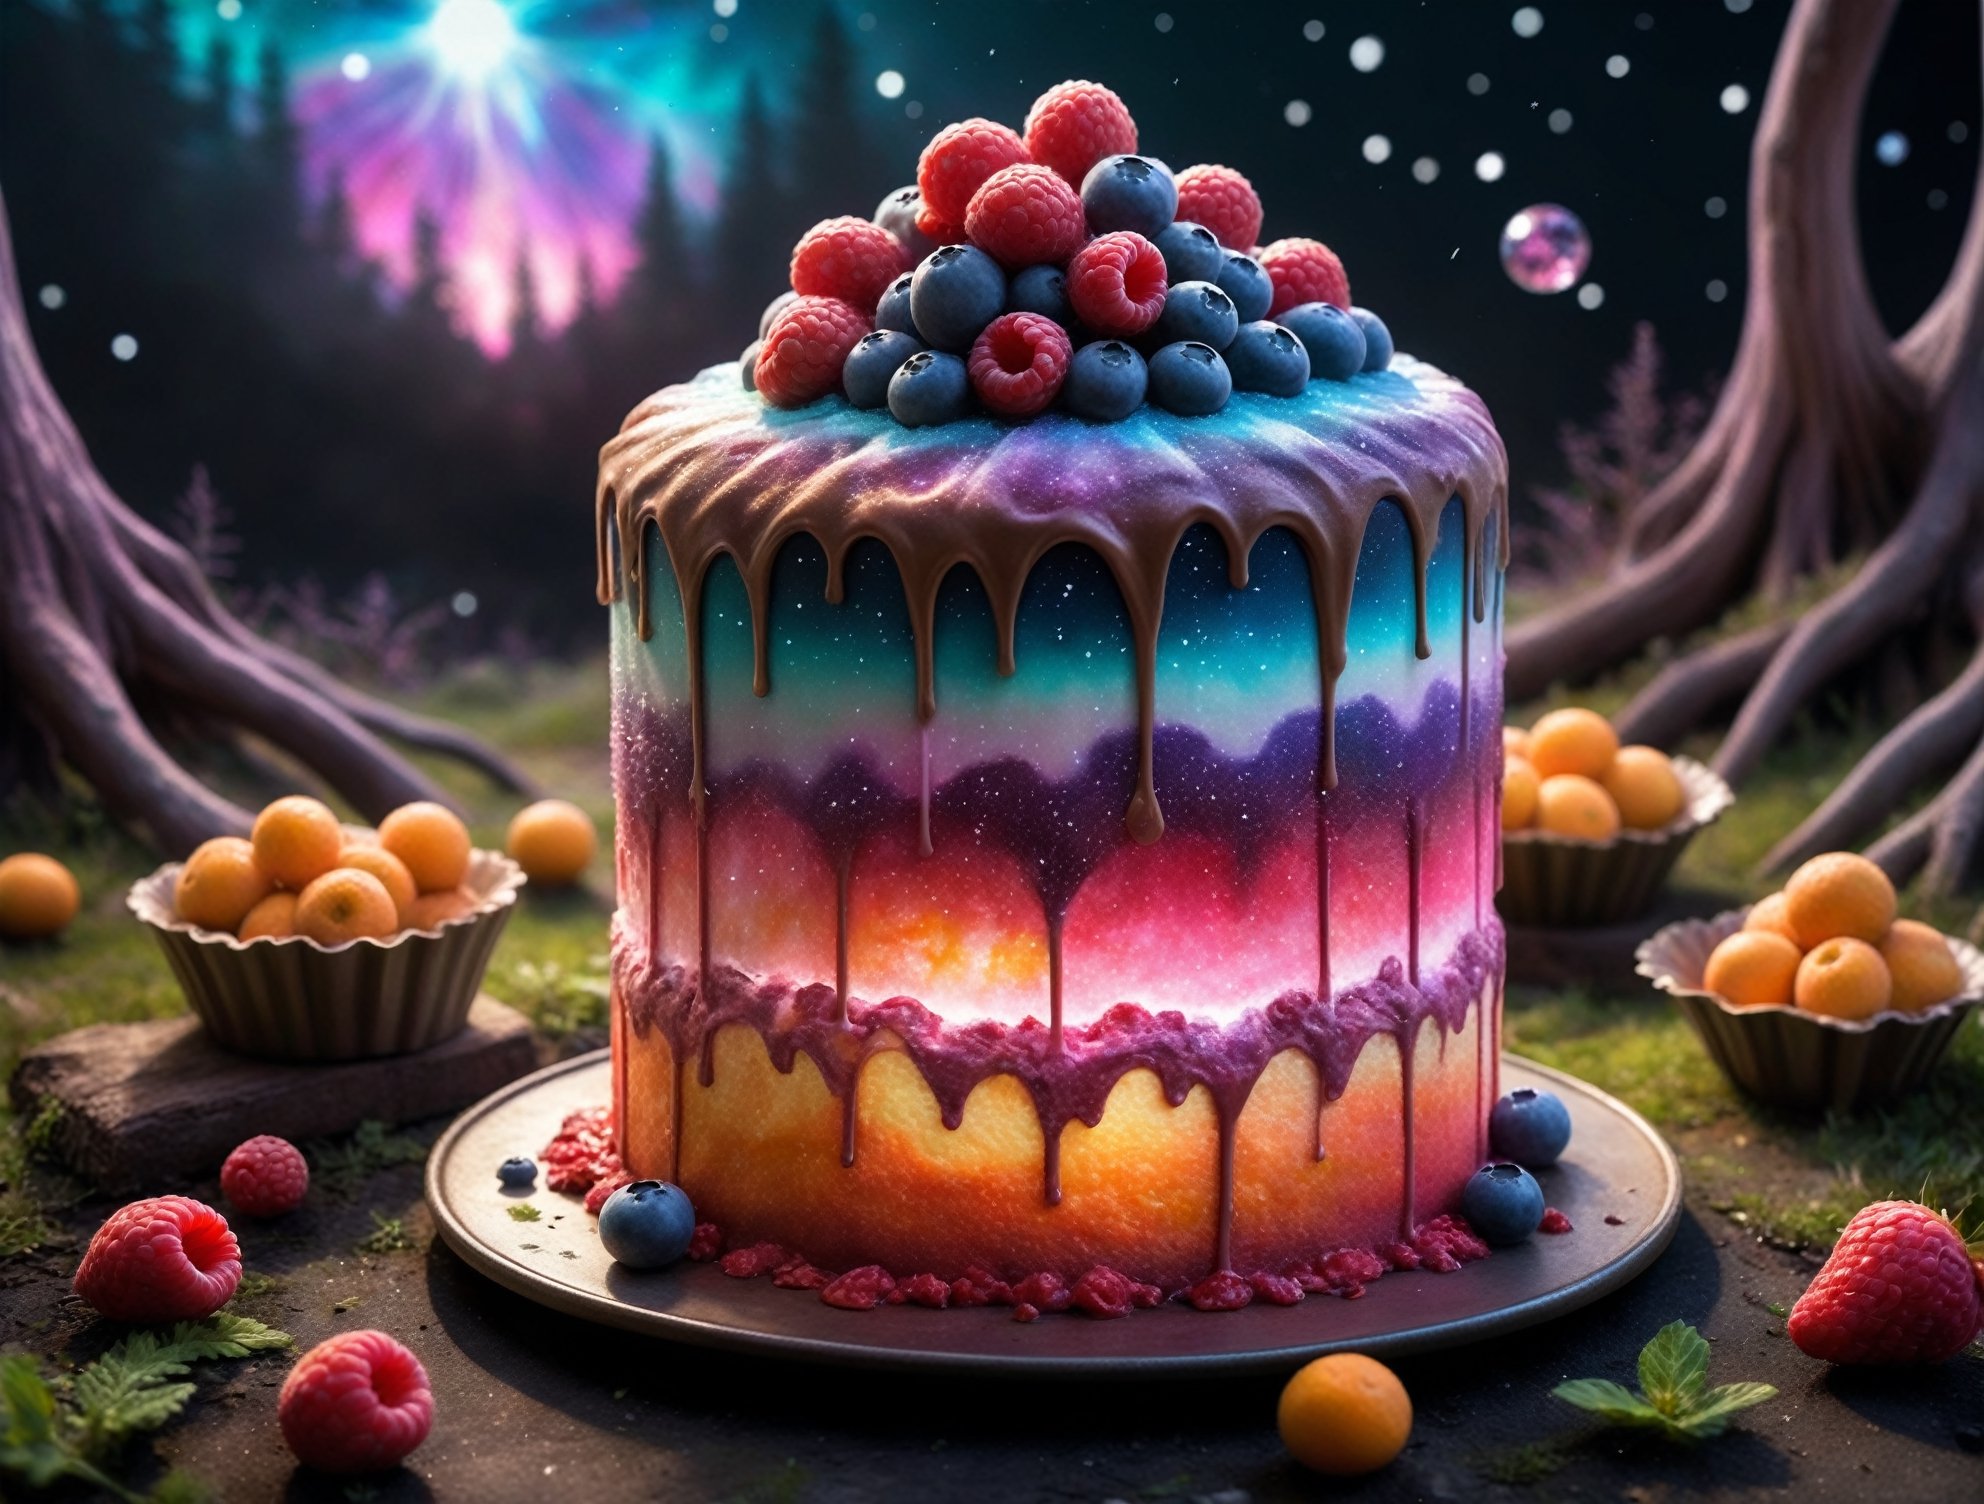 (80s gritty comic book style:1.5), (a delicious glowing cake, a glowing radiant cosmic plasma aurora galaxy berry cake with fantastic icing:1.3), plasma cake, aw0k magnstyle, 
(the cake rests on an arcane crystal tray:1.22), in a in a field of psychedelic flowers, christmas theme, majestic radiant Yggdrasil christmas trees, warm peaceful atmosphere,